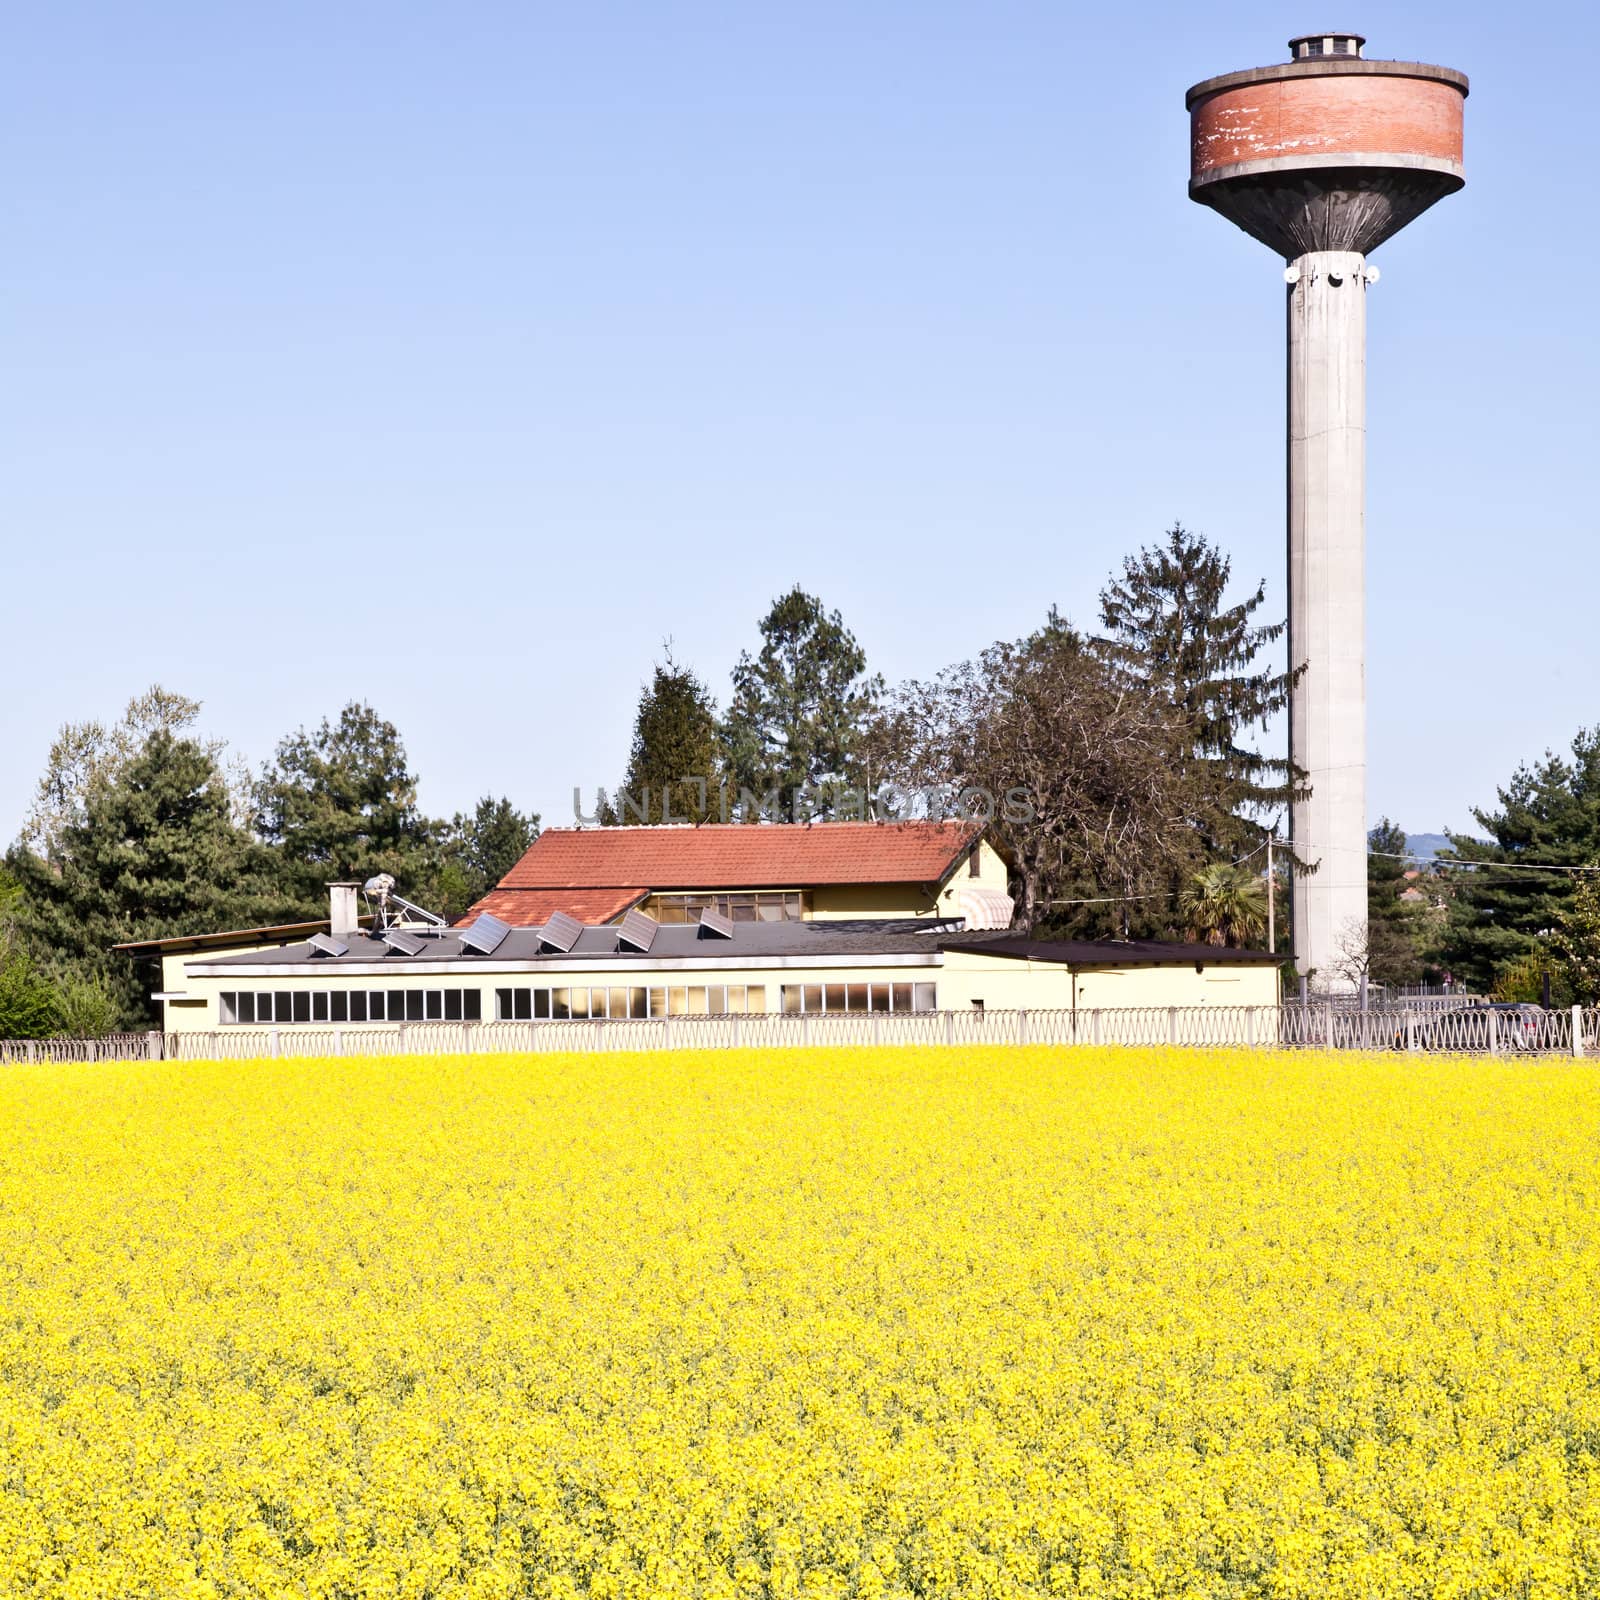 Water tower in a field of yellow flowers during spring season